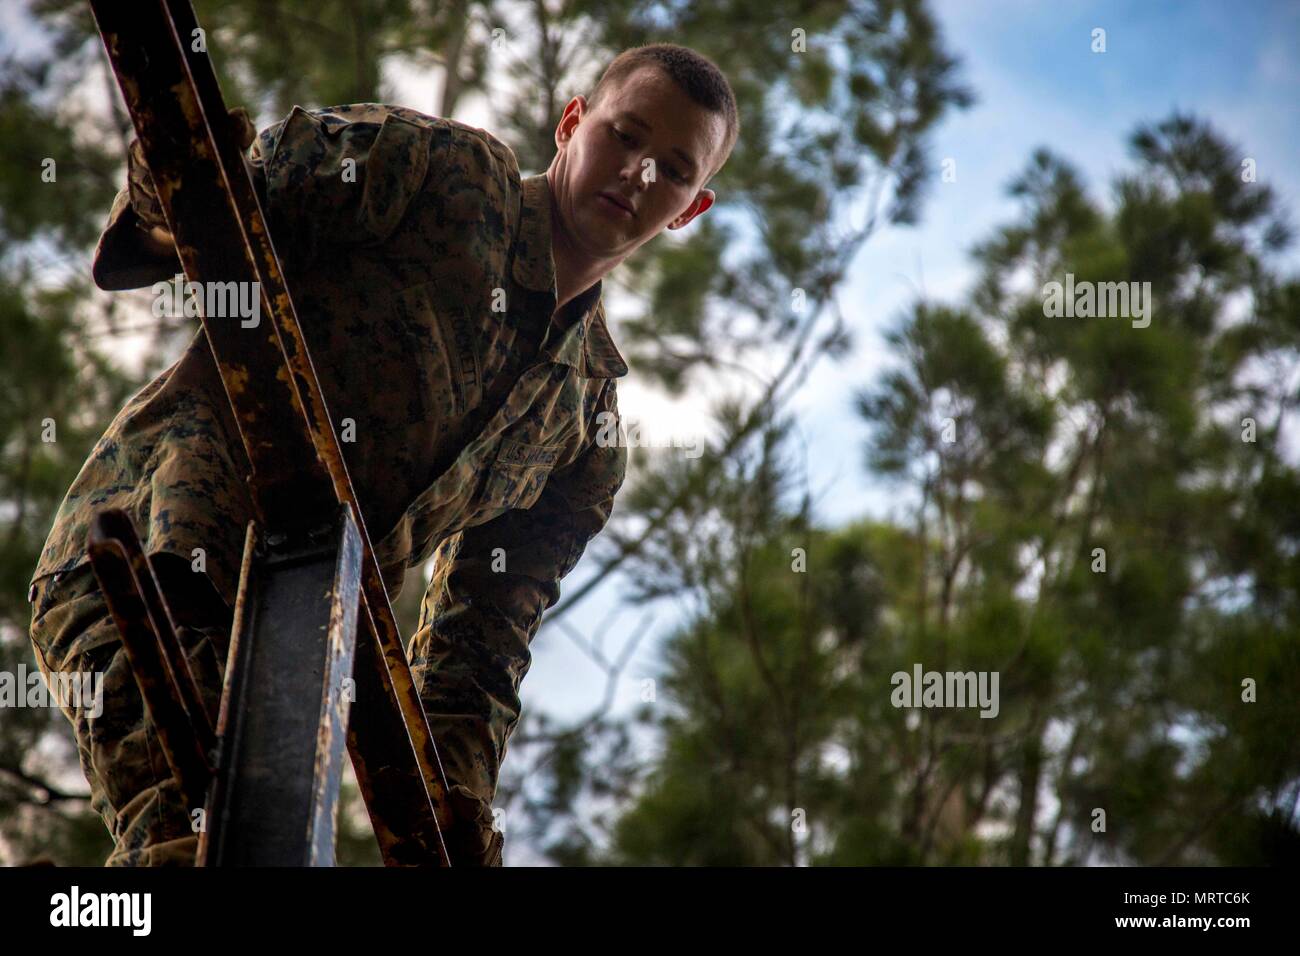 U.S. Marine Corps Lance Cpl. Caleb Rockett, an infantryman with Task Force Koa Moana 17, climbs a ladder as a part of the North Atlantic Treaty Organization obstacle course at Plum, New Caledonia, June 30, 2017. Koa Moana 17 is designed to improve interoperability with our partners, enhance military-to-military relations, and expose the Marine Corps forces to different types of terrain for familiarity in the event of a natural disaster in the region.   (U.S. Marine Corps photo by MCIPAC Combat Camera Lance Cpl. Juan C. Bustos) Stock Photo